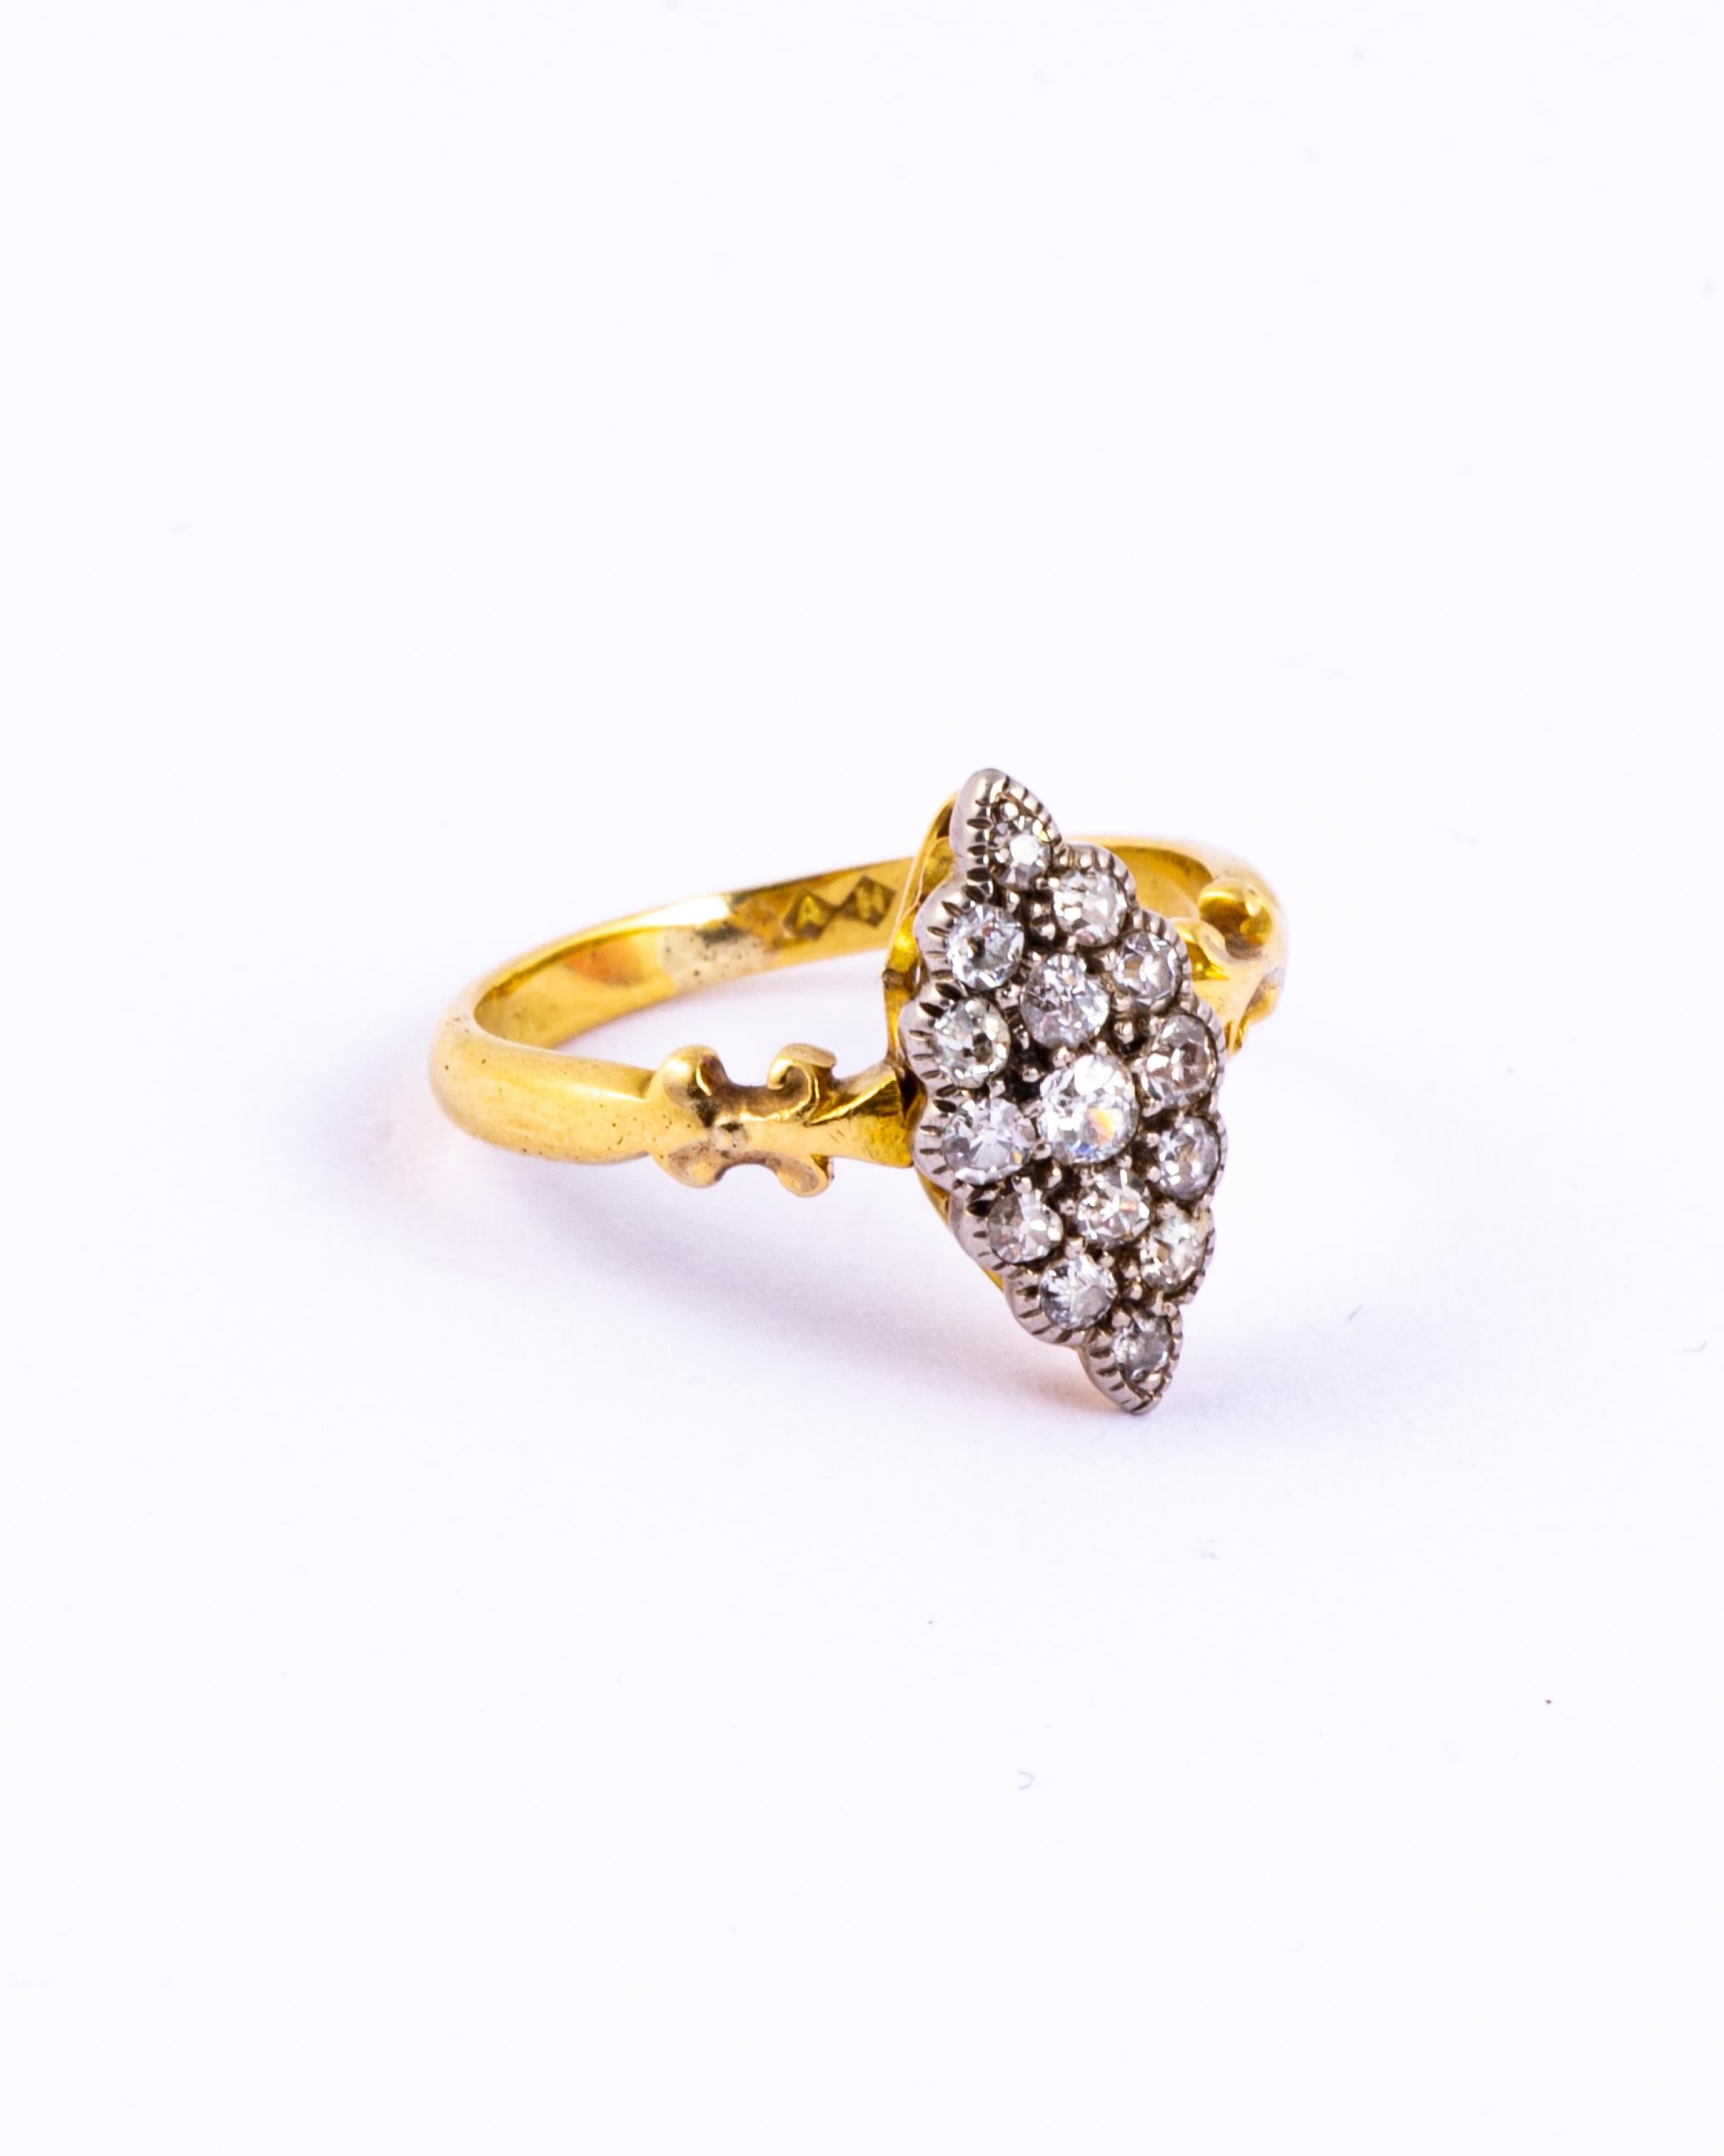 The style of this Edwardian ring is stunning. Each diamond is clean and bright and has gorgeous sparkle. The diamonds total approx 80pts and the shoulders are delicate scrolls. 

Size: J or 4 3/4 
Dimensions: 15x7mm

Weight: 2.67g